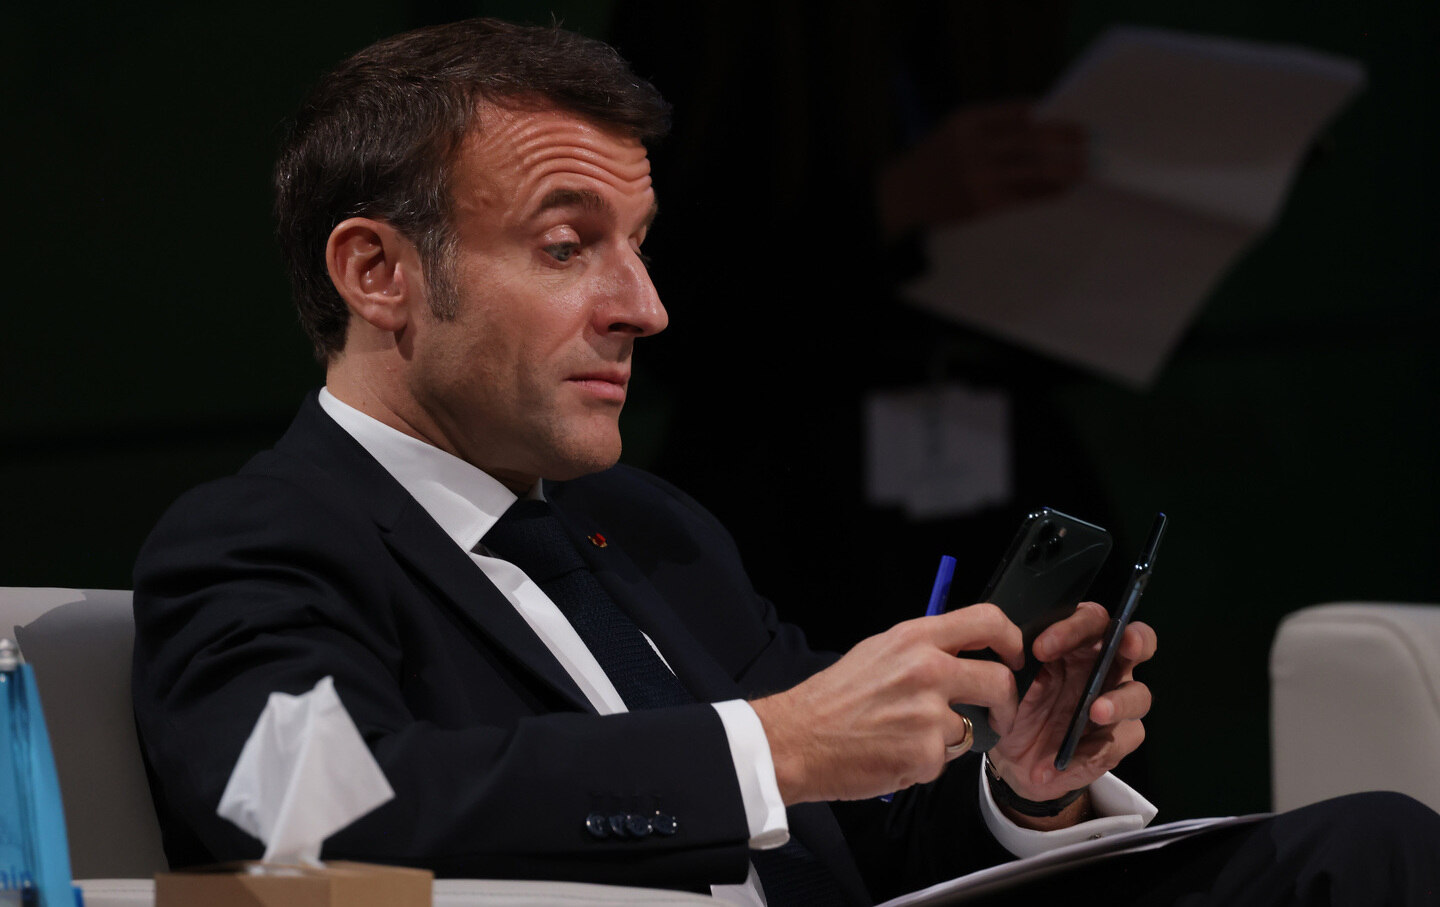 French President Emmanuel Macron looks at his smartphone.